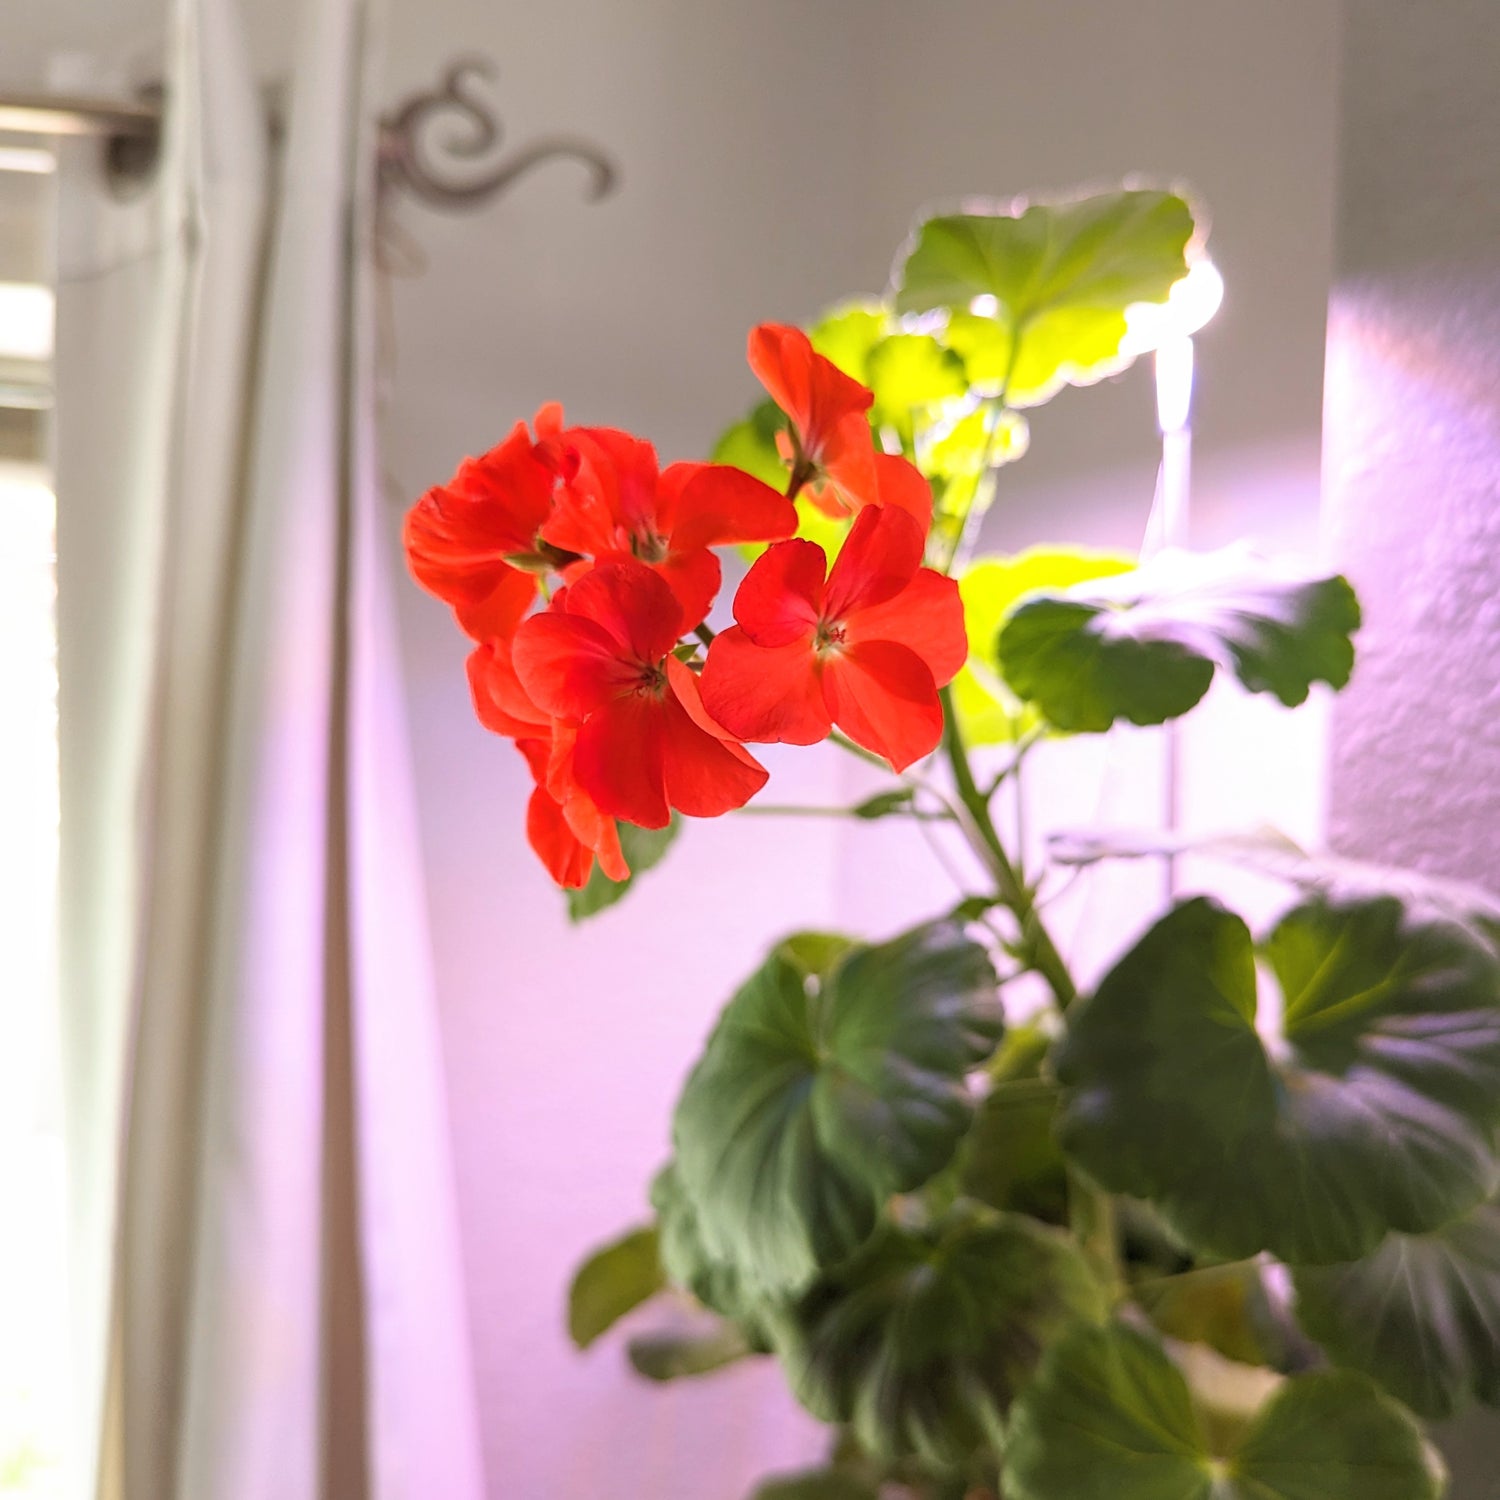 5 Flowers that Bloom Indoors and How to Keep Them Flowering